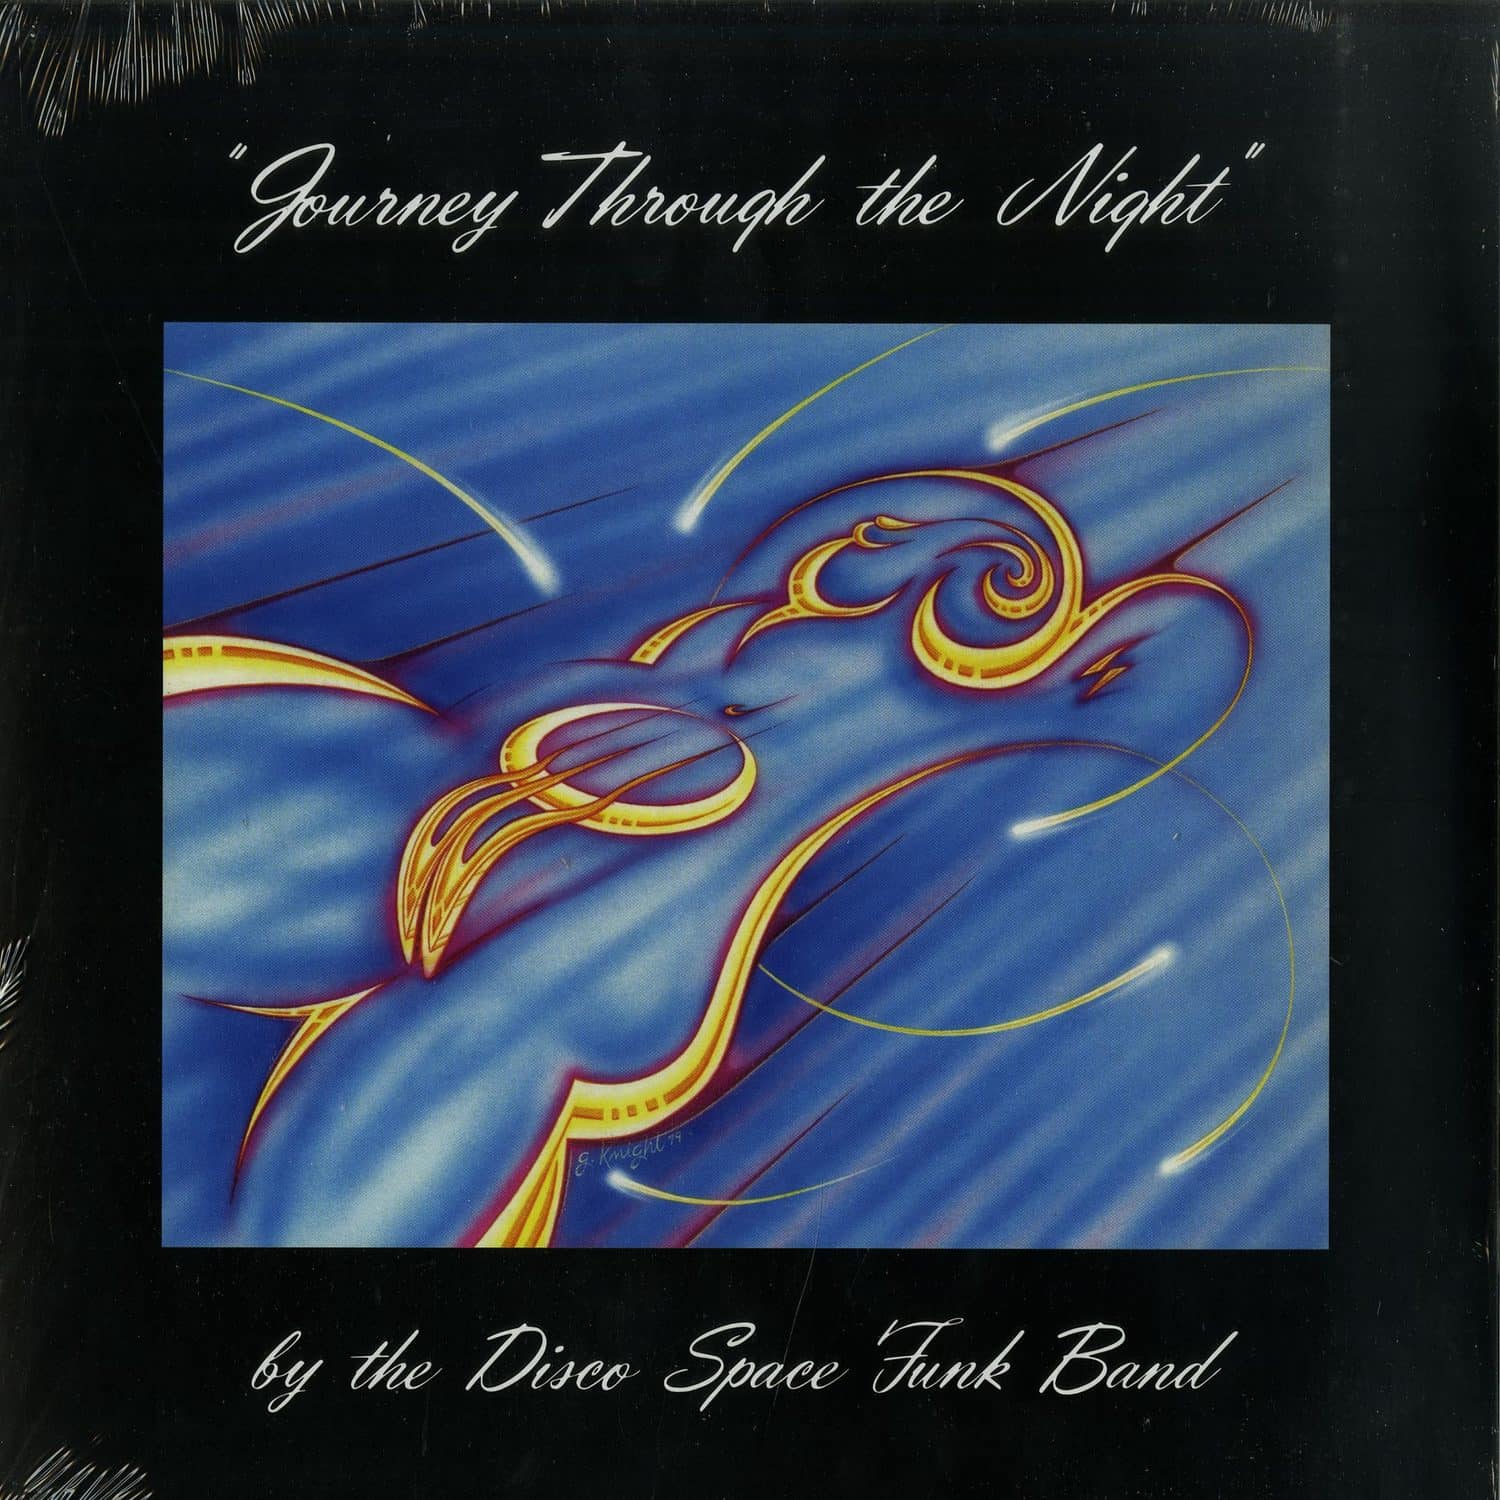 The Disco Space Funk Band - JOURNEY THROUGH THE NIGHT